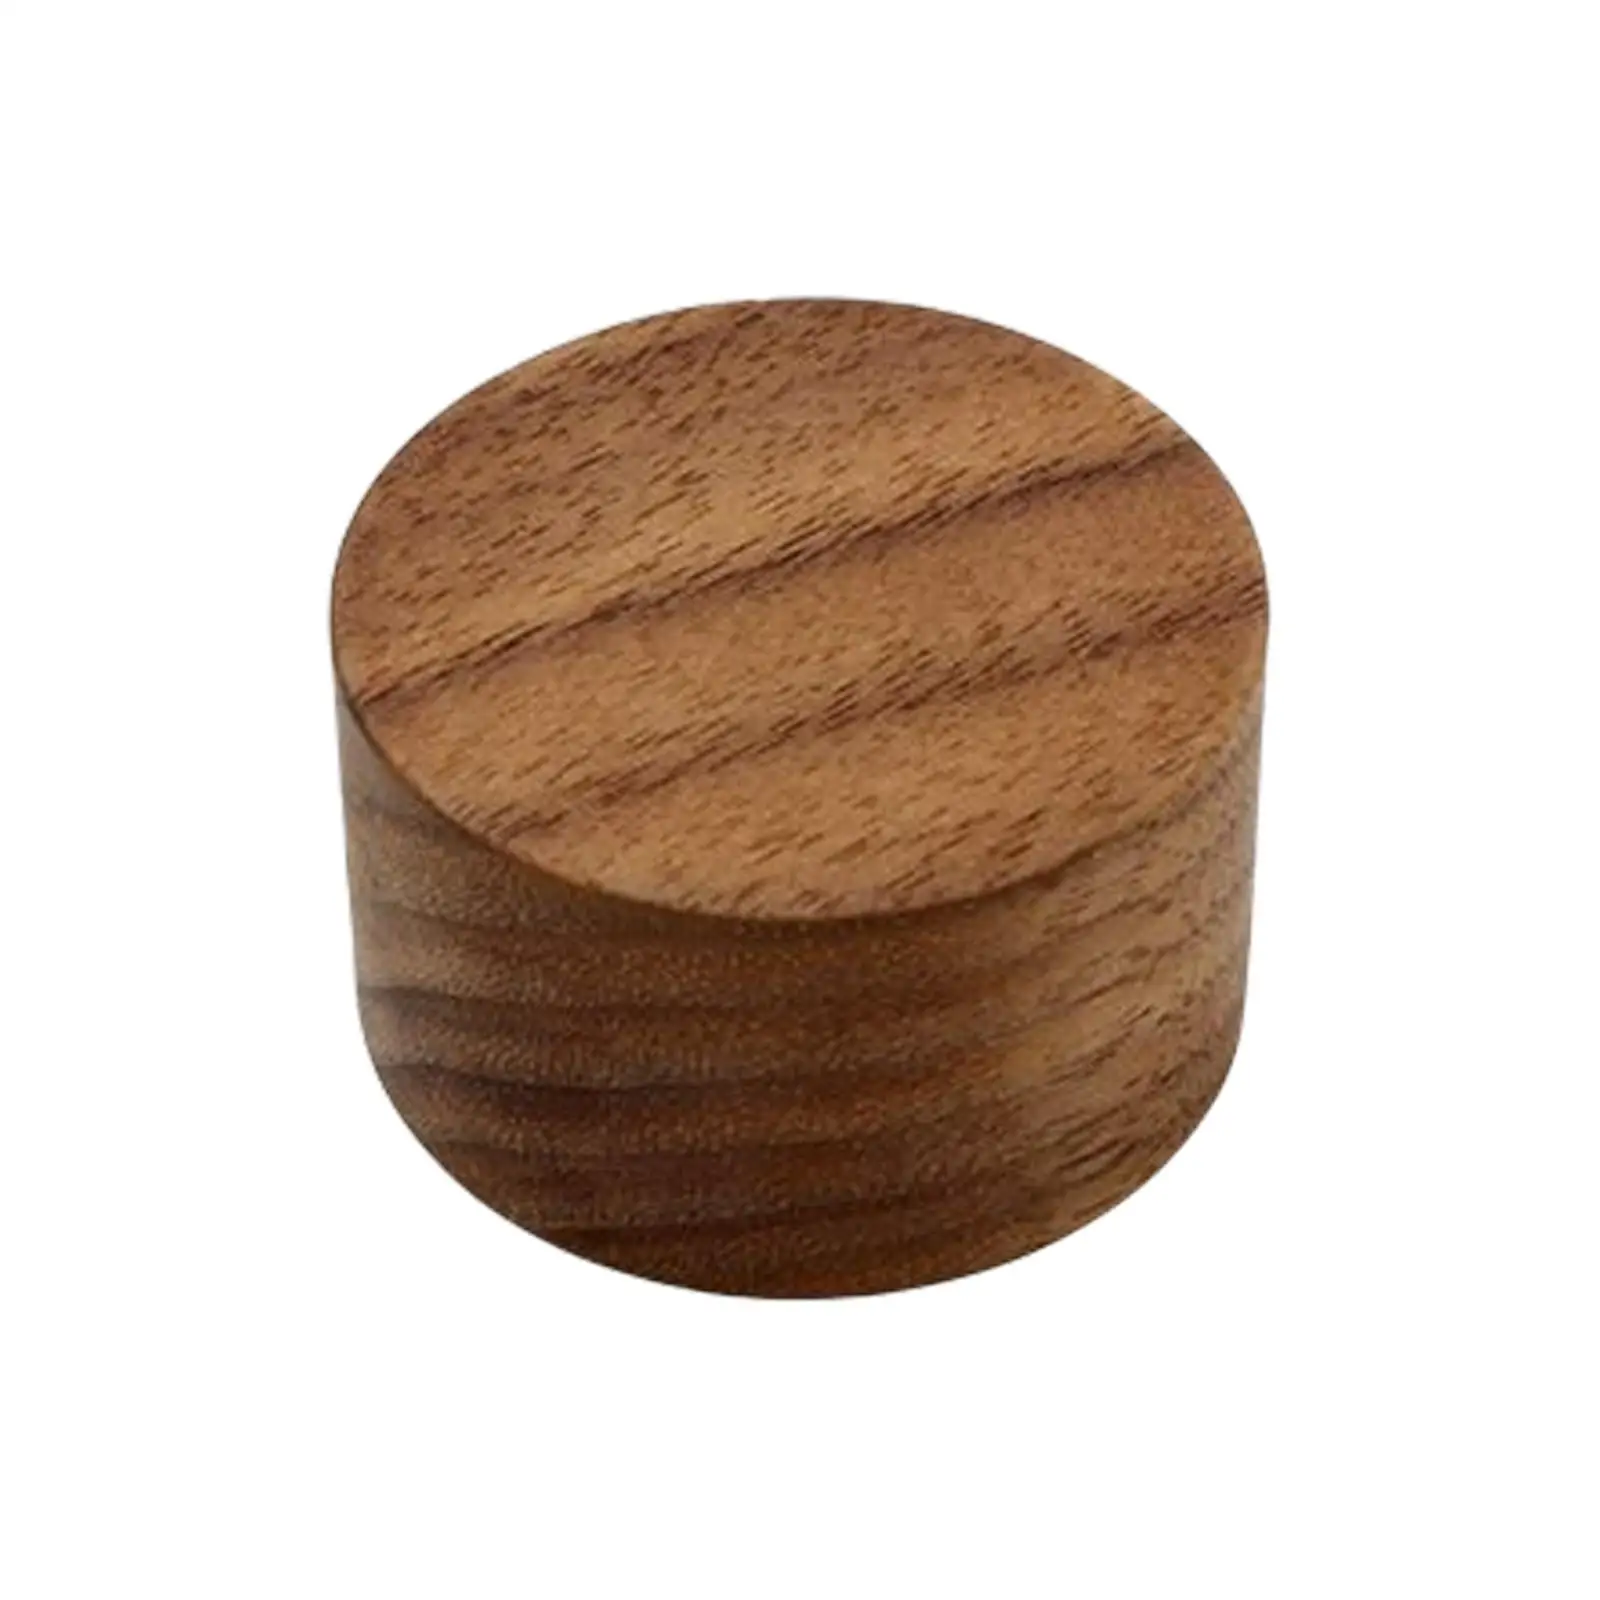 Gas Decorative Wood Knob Outdoor Camping Equipment Part